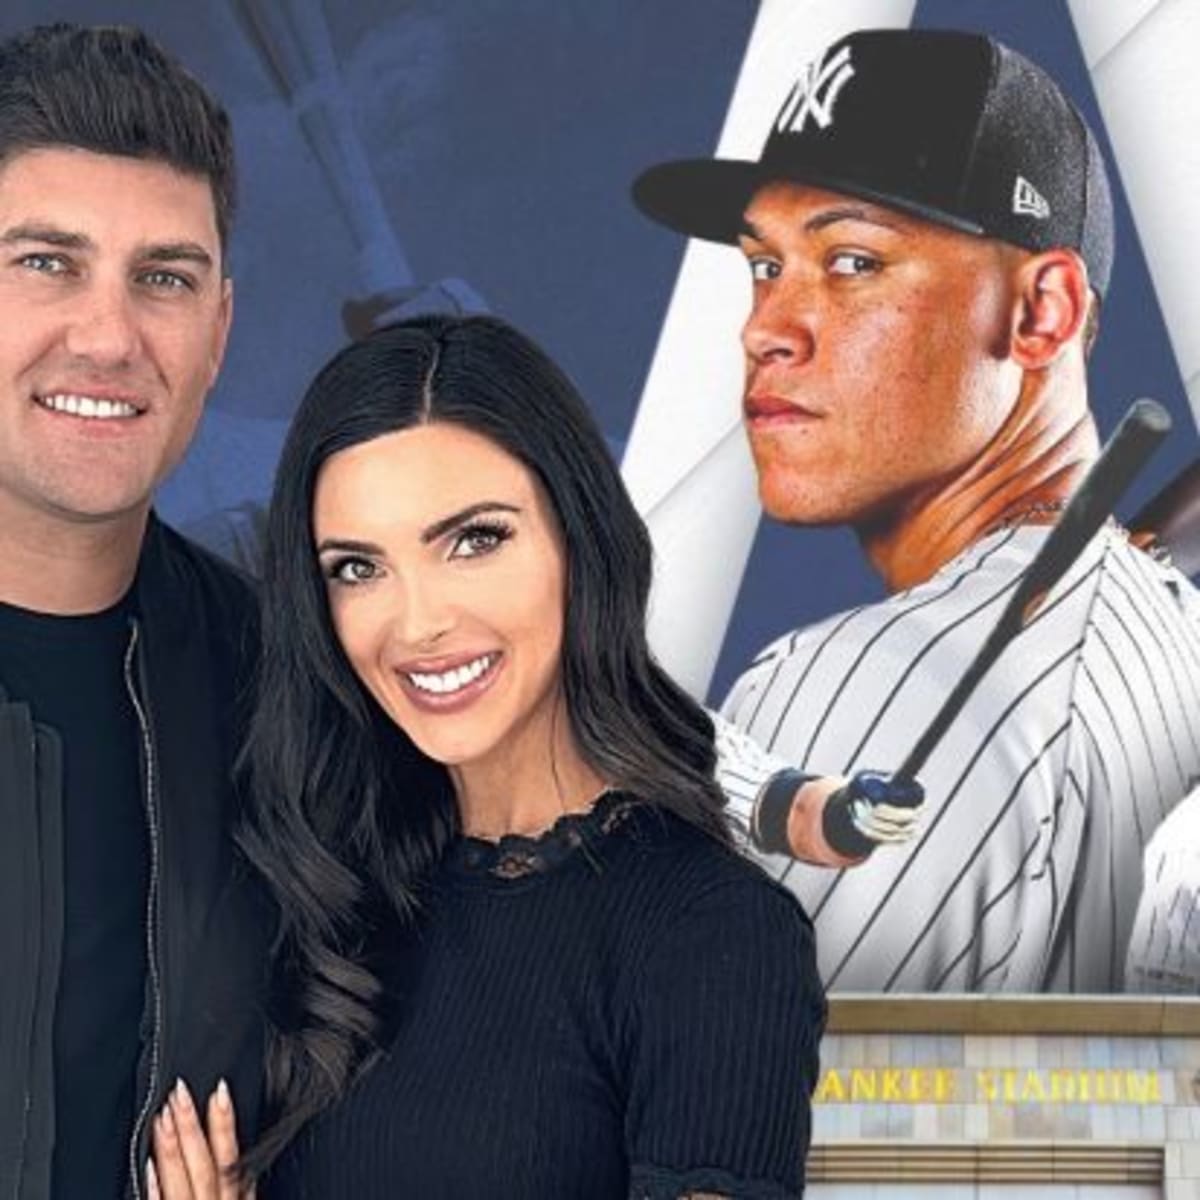 Judging Cory: Inside Dallas Fan's Yankees Aaron Judge HR Ball Call -  Comfort Over Cash - Sports Illustrated Texas Rangers News, Analysis and More